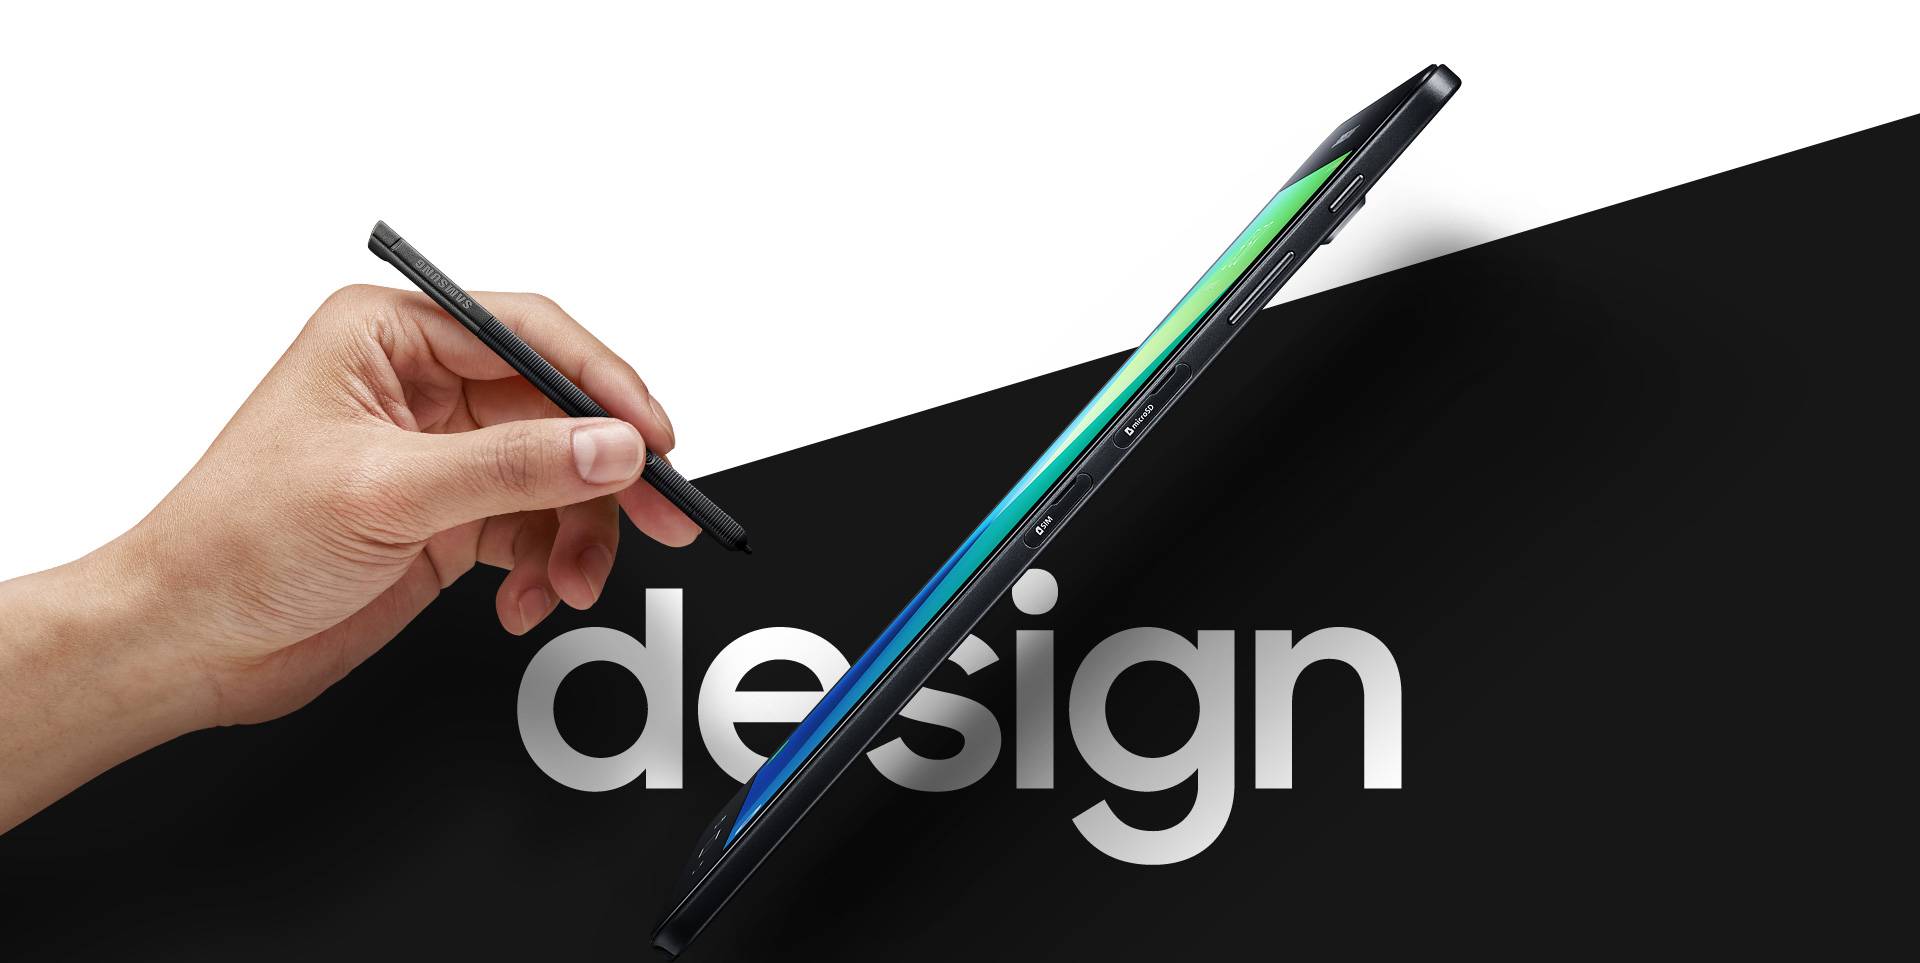 samsung-galaxy-tab-a-2016-with-s-pen-news-release